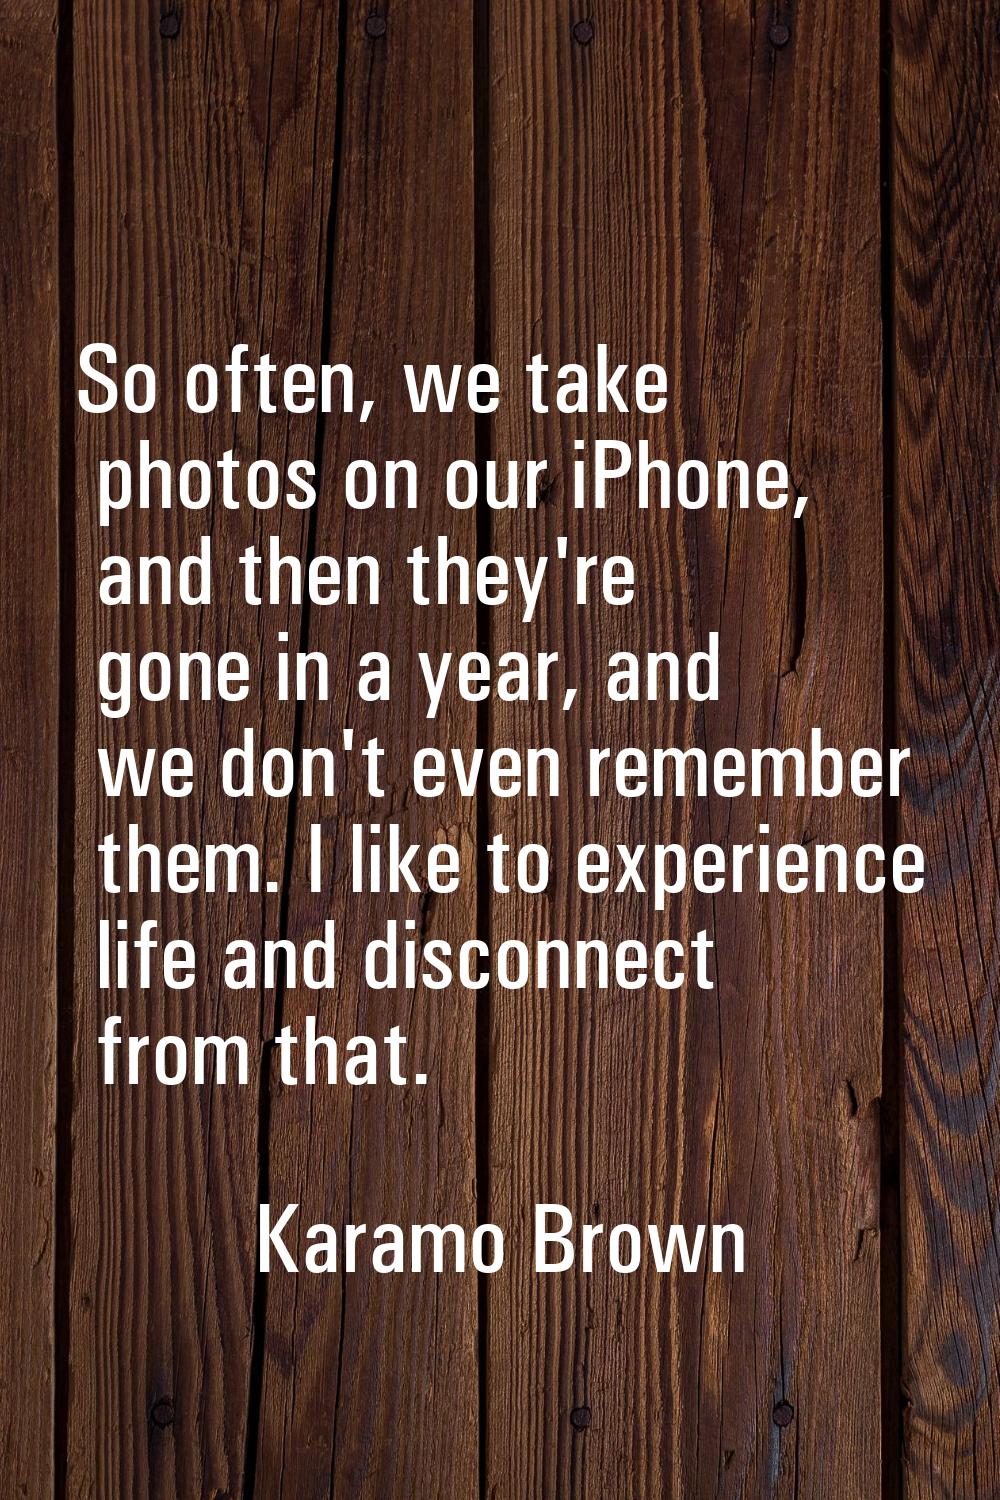 So often, we take photos on our iPhone, and then they're gone in a year, and we don't even remember